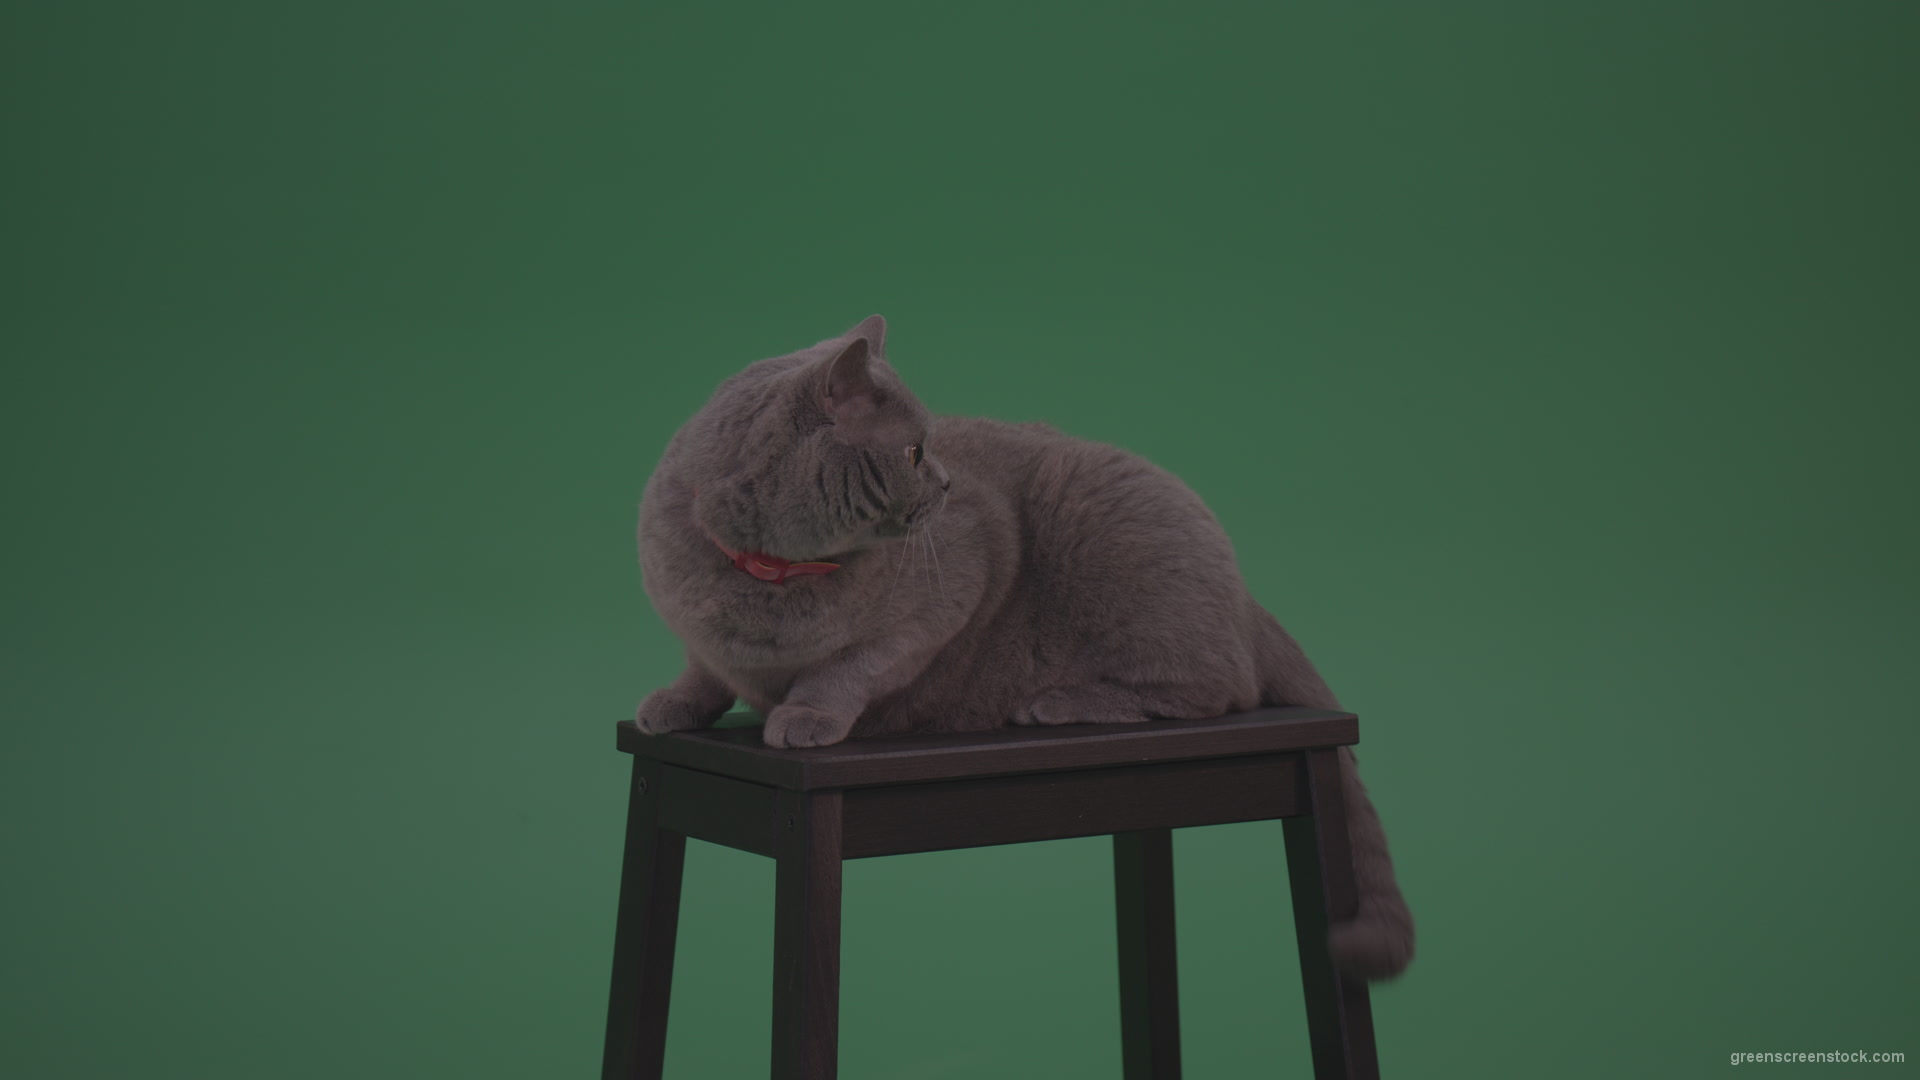 British-Gey-Cat-Sitting-On-Stool-Wagging-The-Tail-On_Green-Screen-Chroma-Key-Wall-Background_002 Green Screen Stock